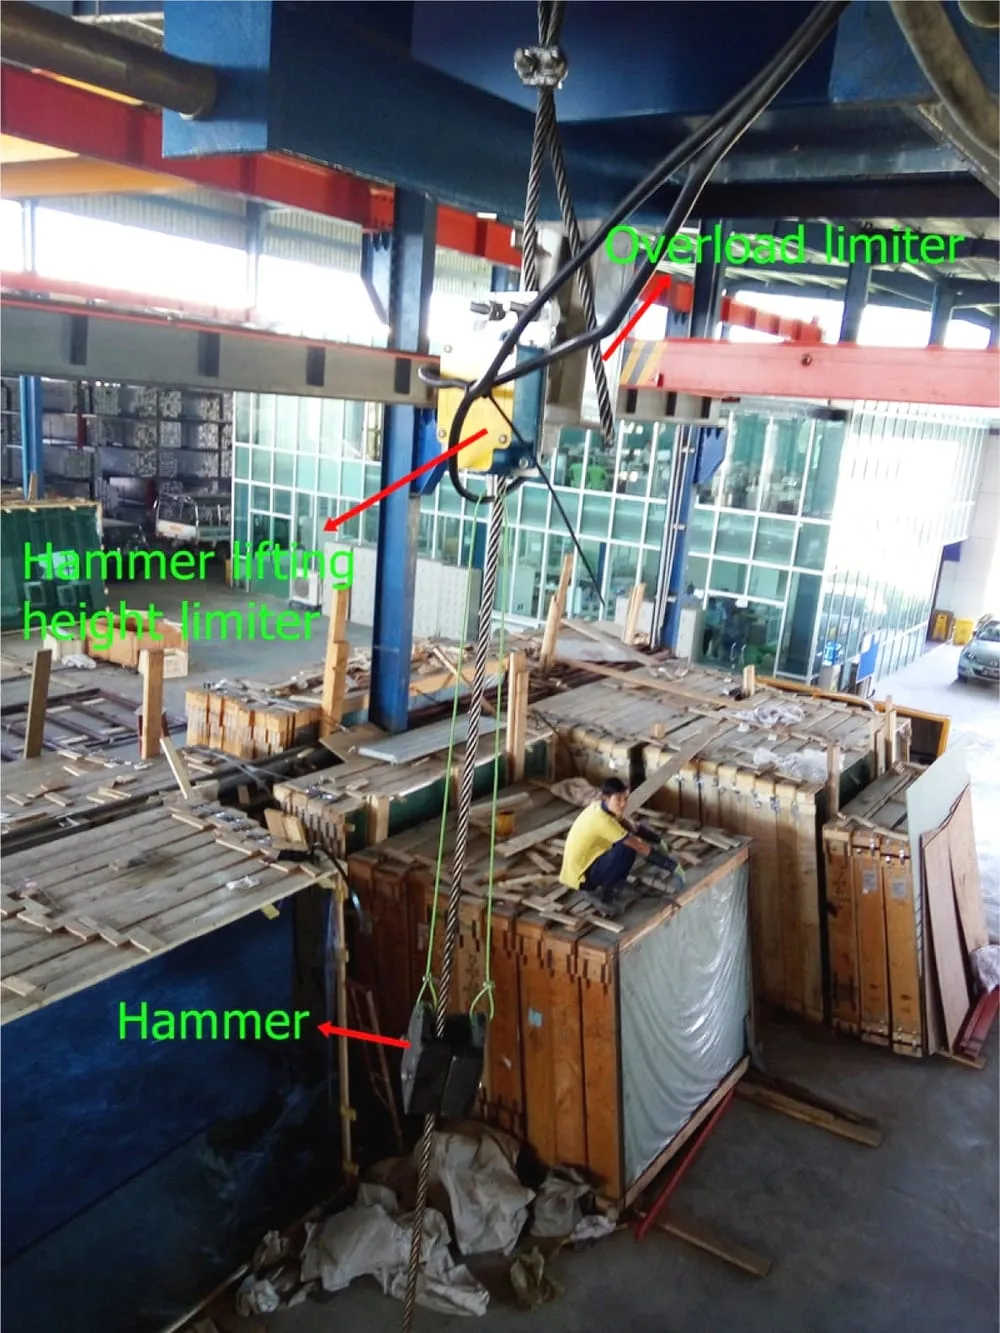 Hammer and Electric hoist overload limit switch